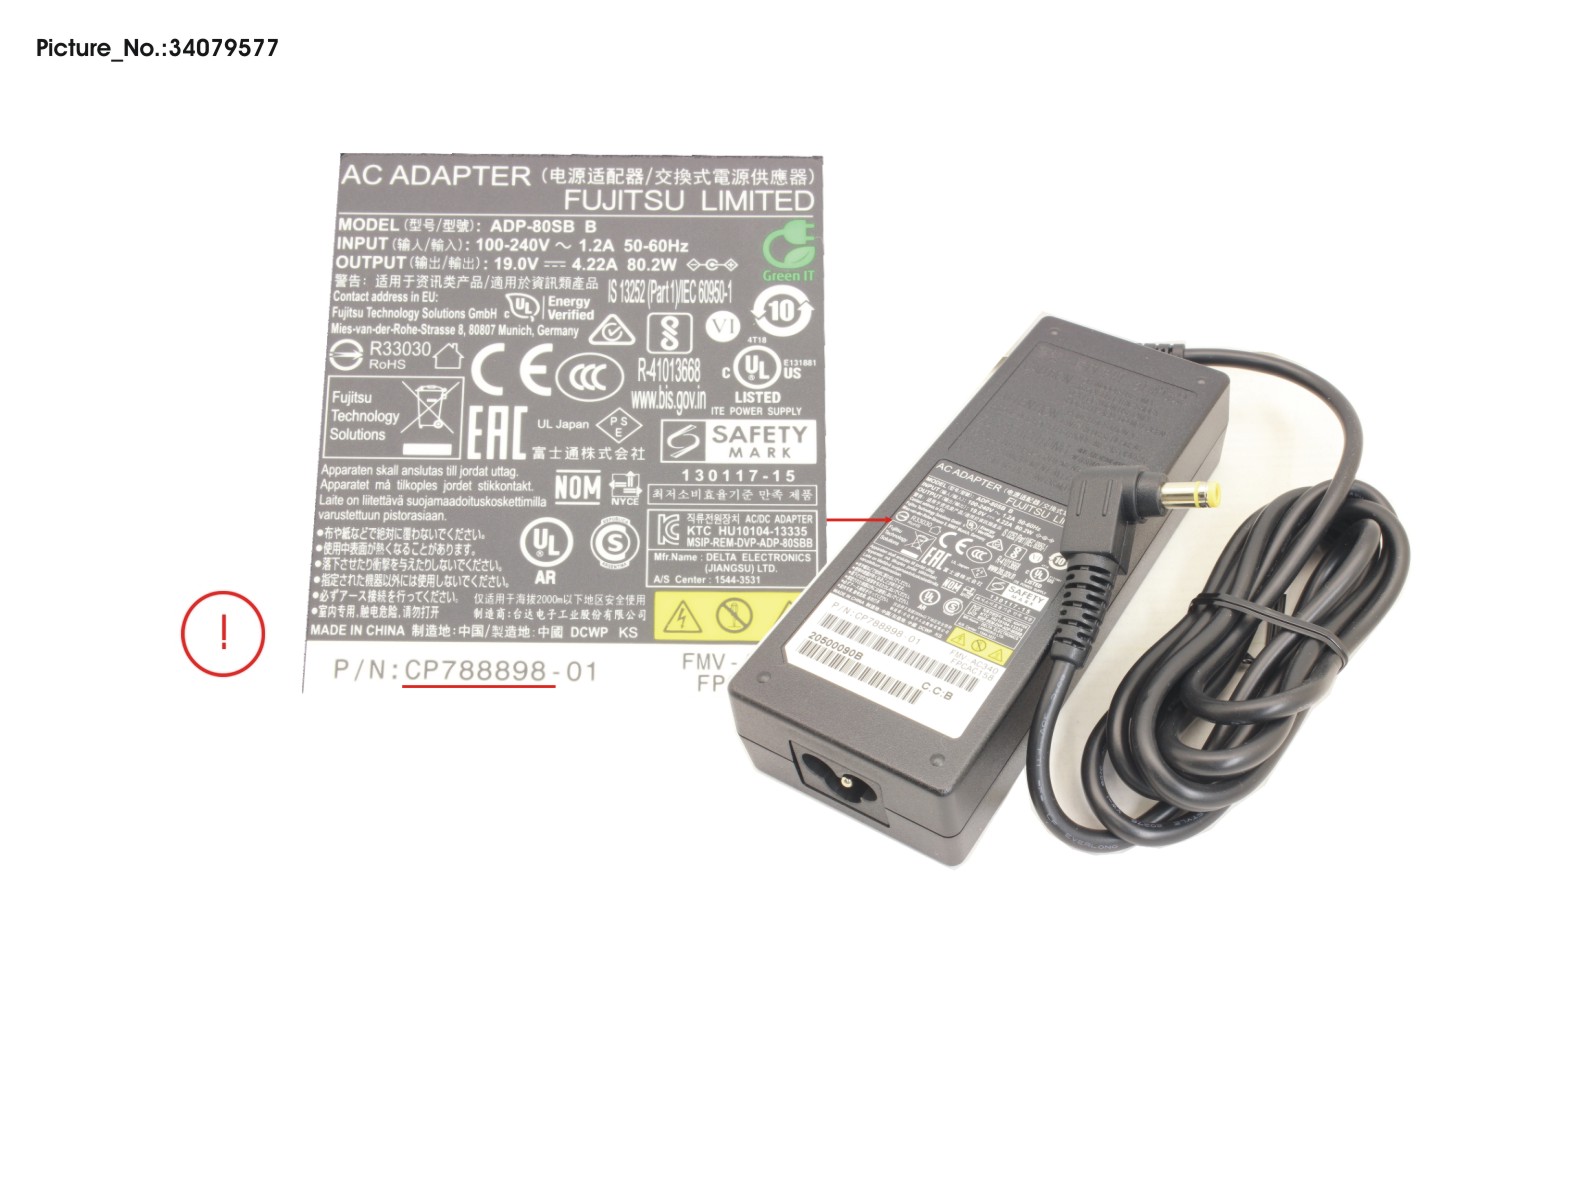 AC-ADAPTER 19V 80W (3-PIN) ERP